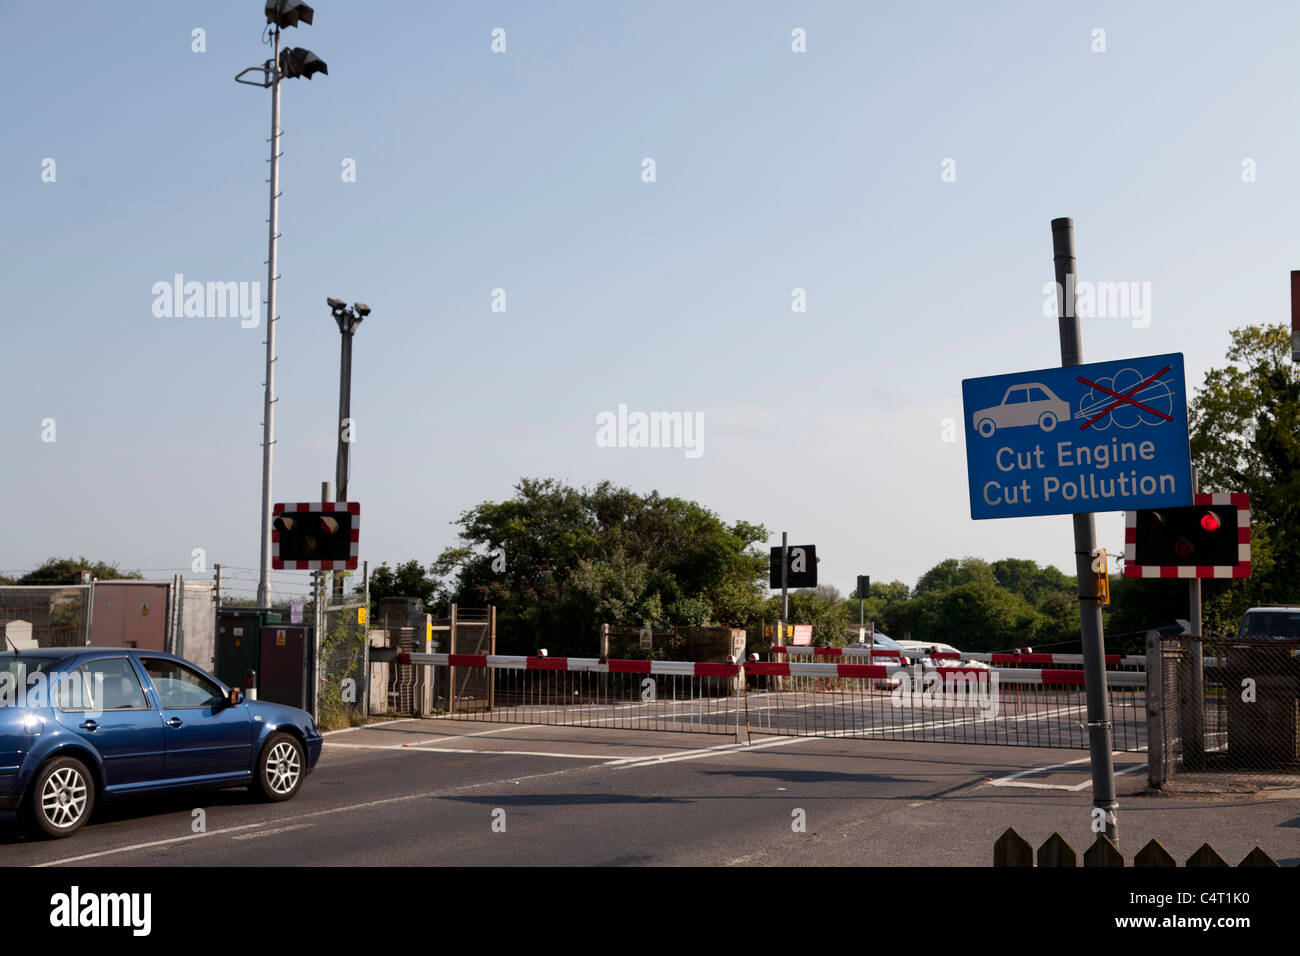 cars waiting at closed railway level crossing with cut engine cut pollution sign Stock Photo